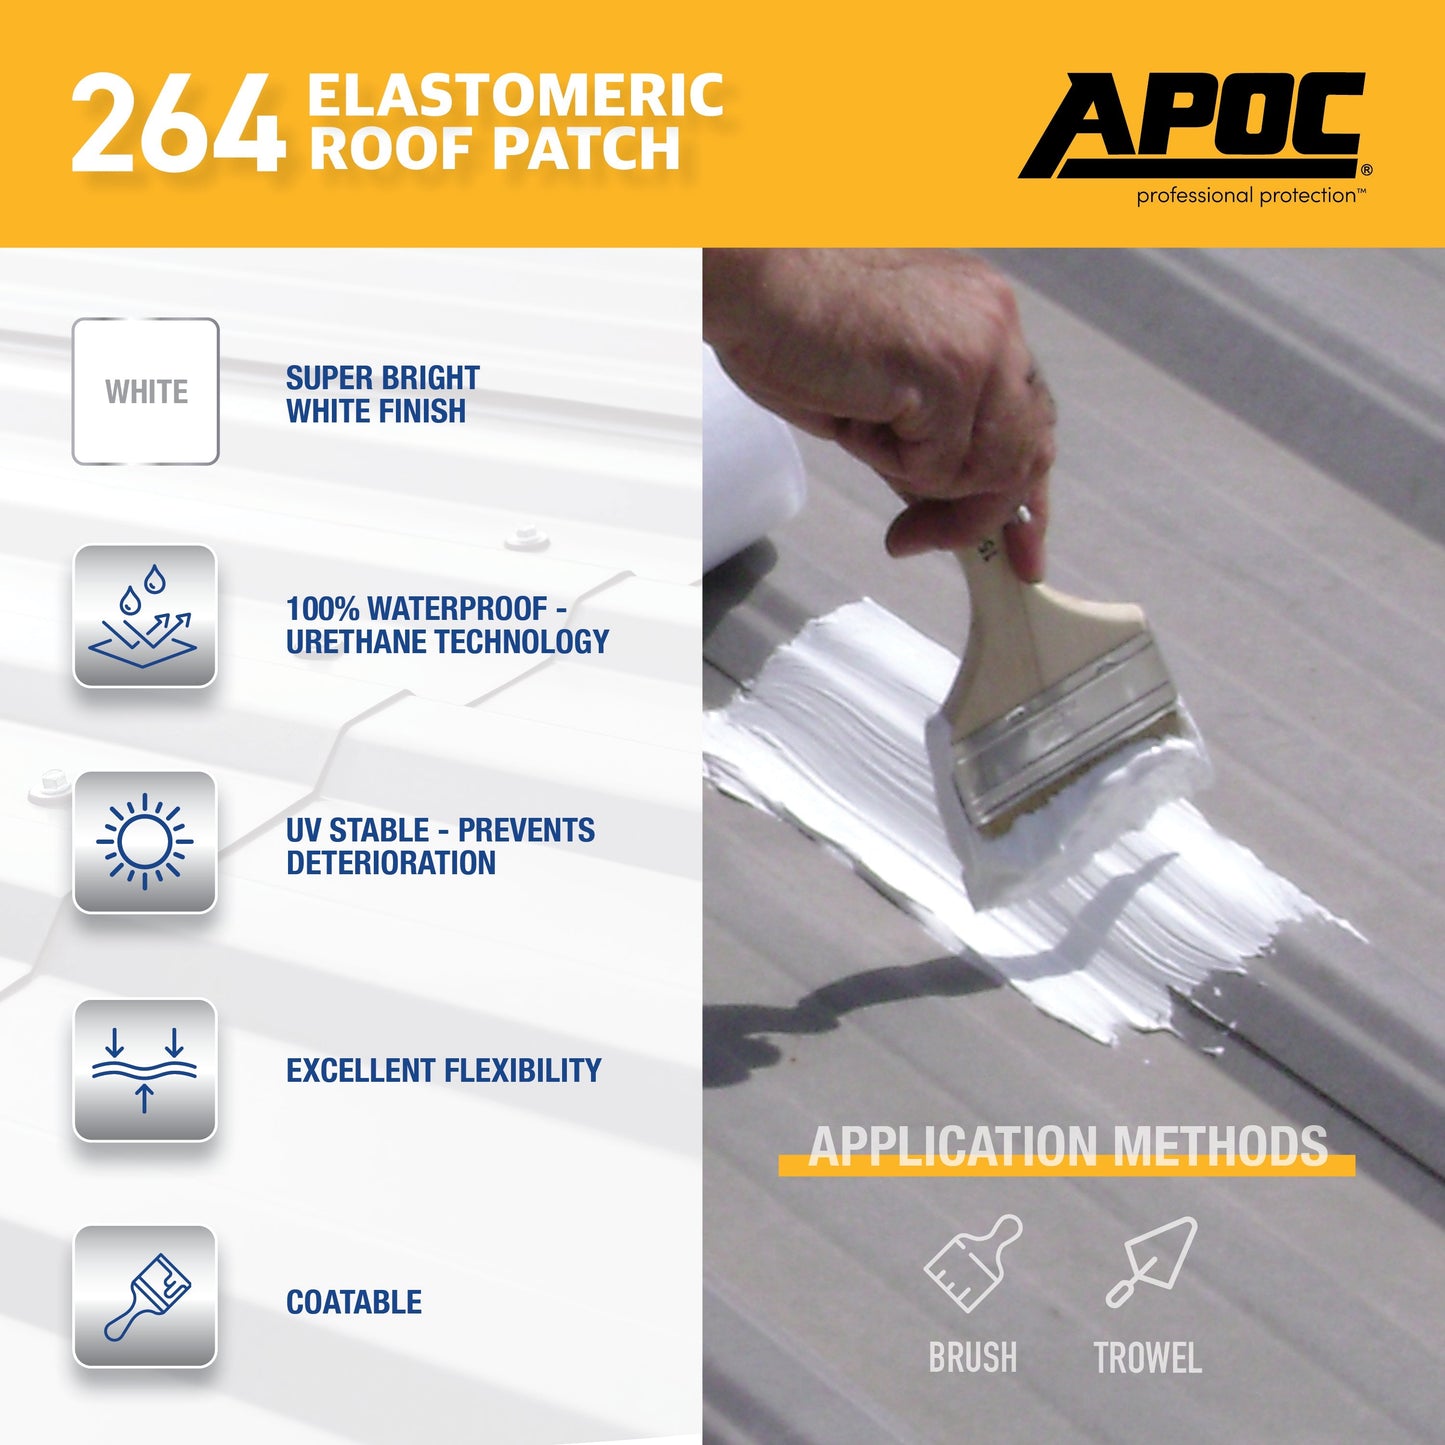 APOC<sup>®</sup> 264<br>Elastomeric Roof Patch